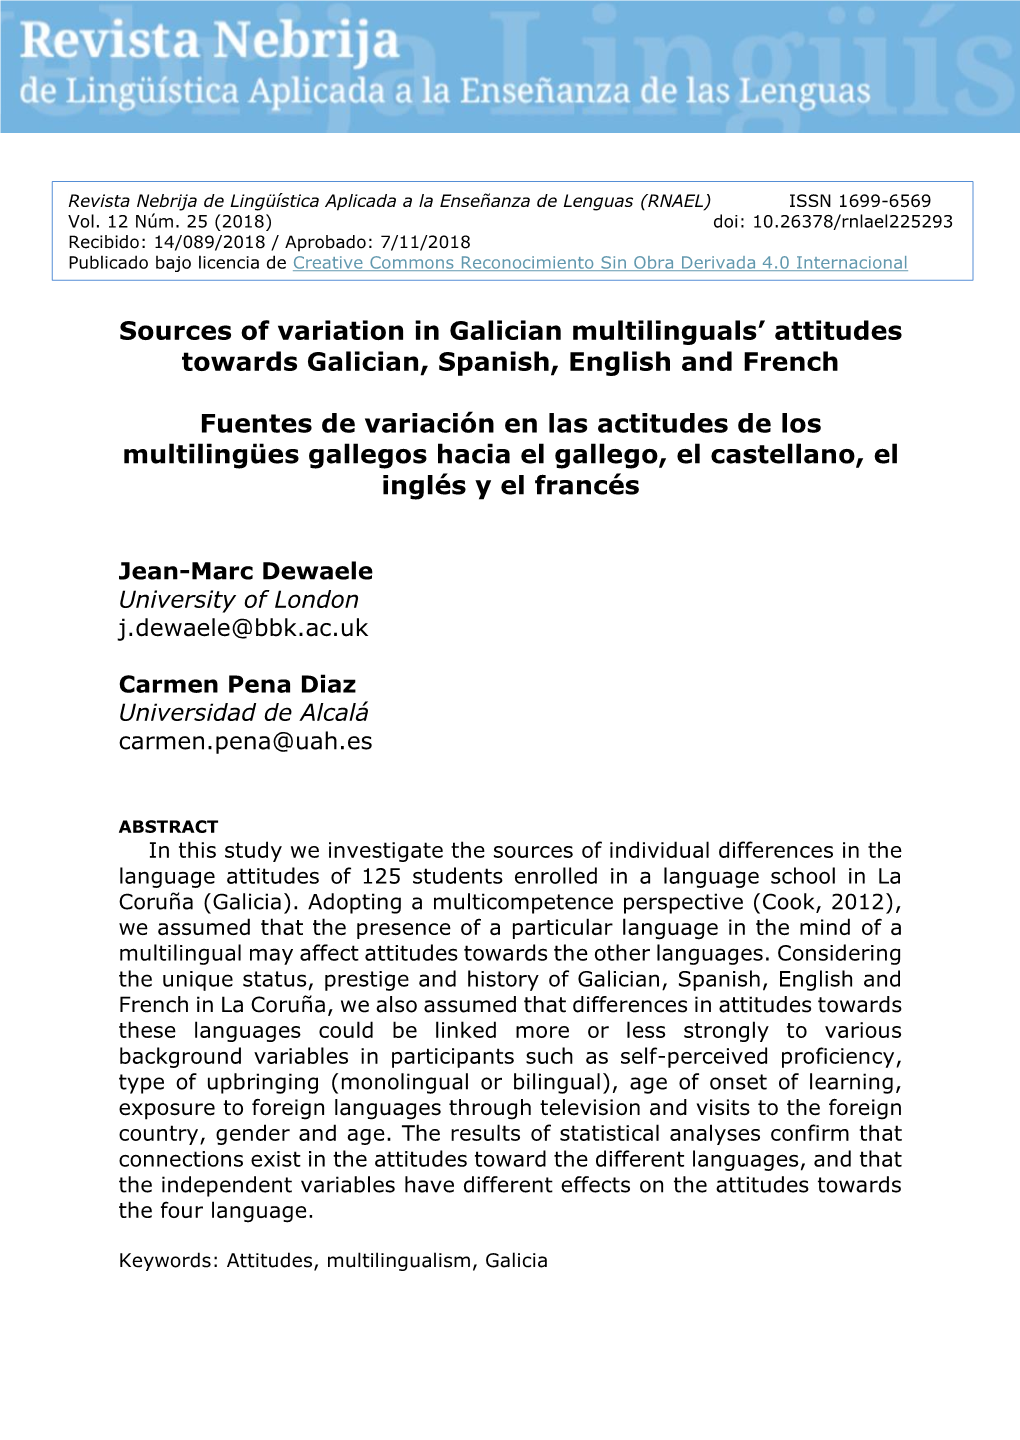 Sources of Variation in Galician Multilinguals’ Attitudes Towards Galician, Spanish, English and French